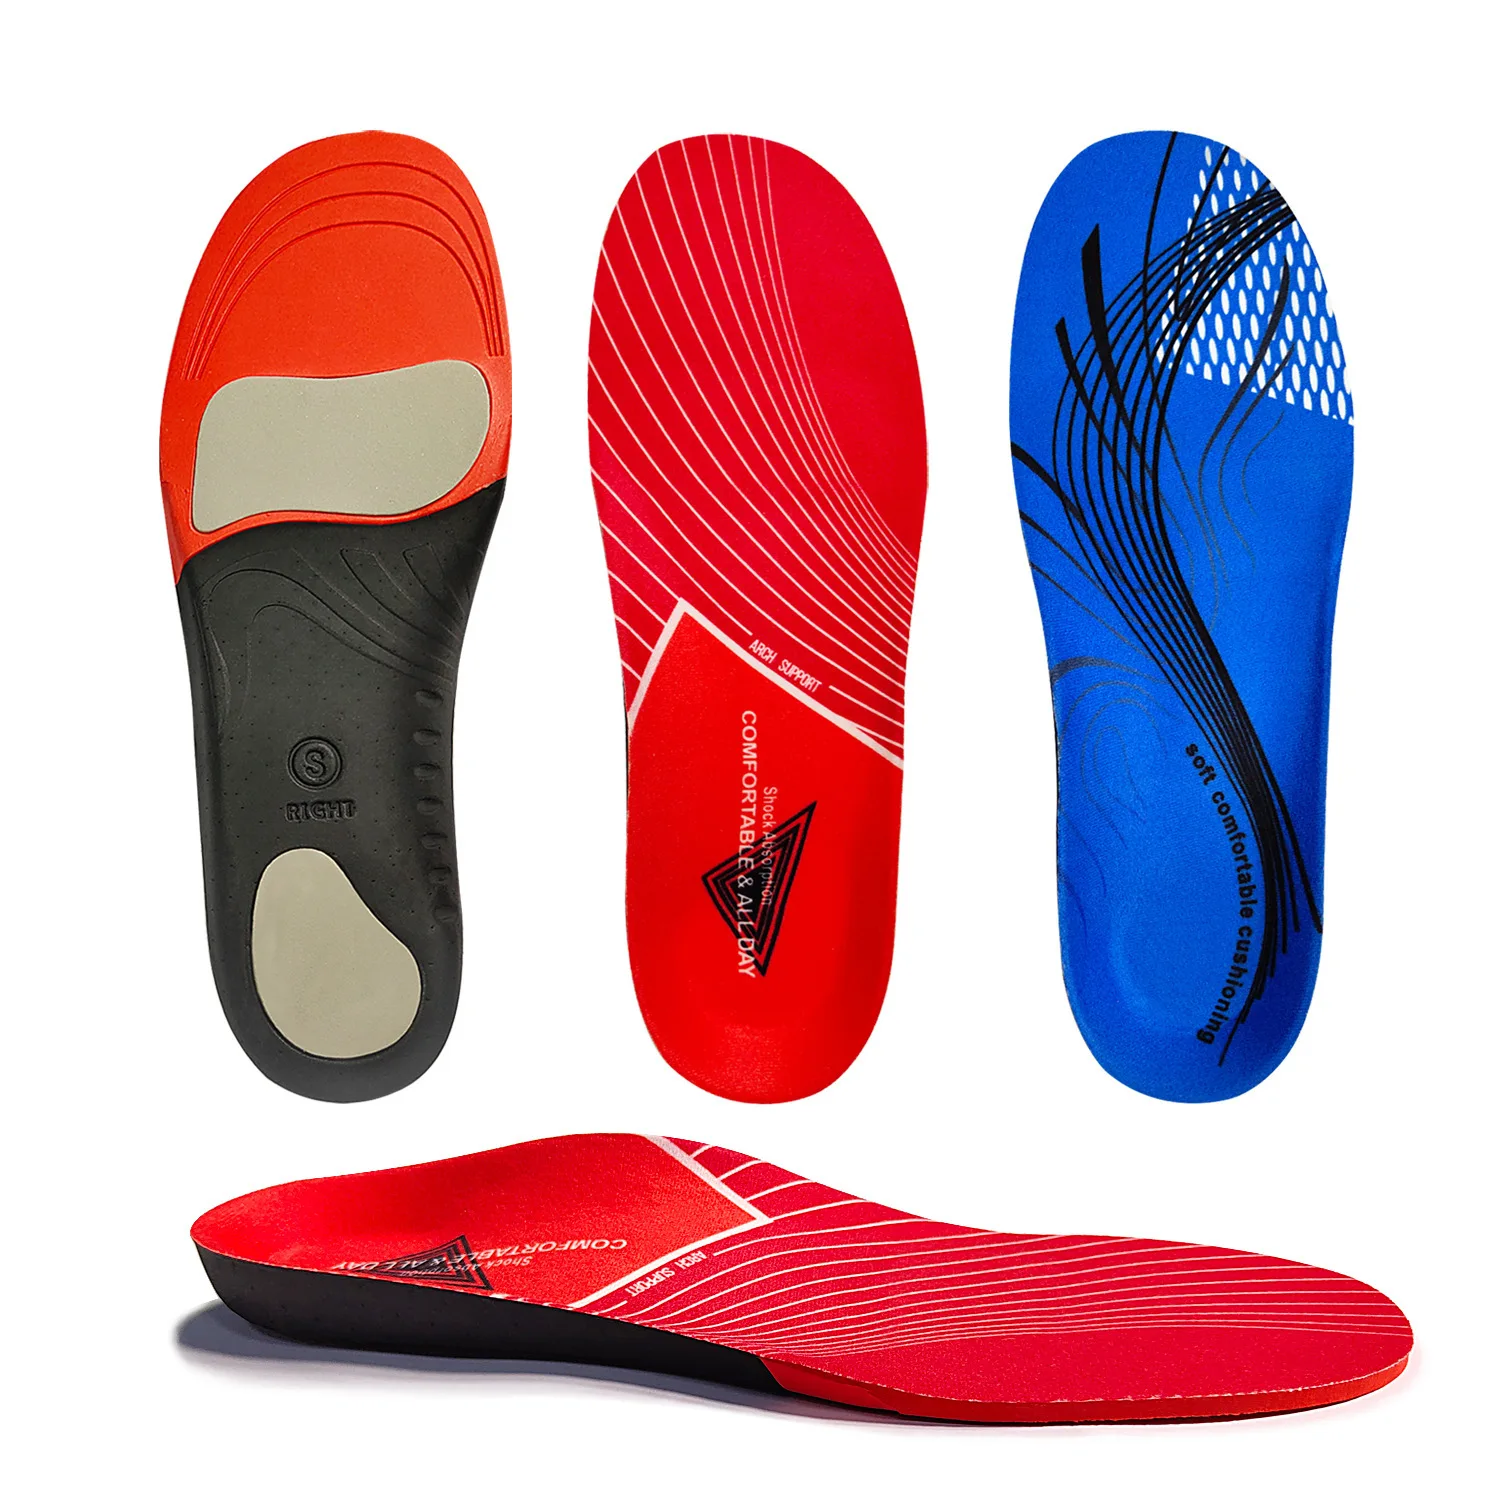 

Flat Feet Orthopedic Insoles For Shoes Men Women Arch Support Foot Varus Valgus Corrector Shock Absorption Breathable Insoles